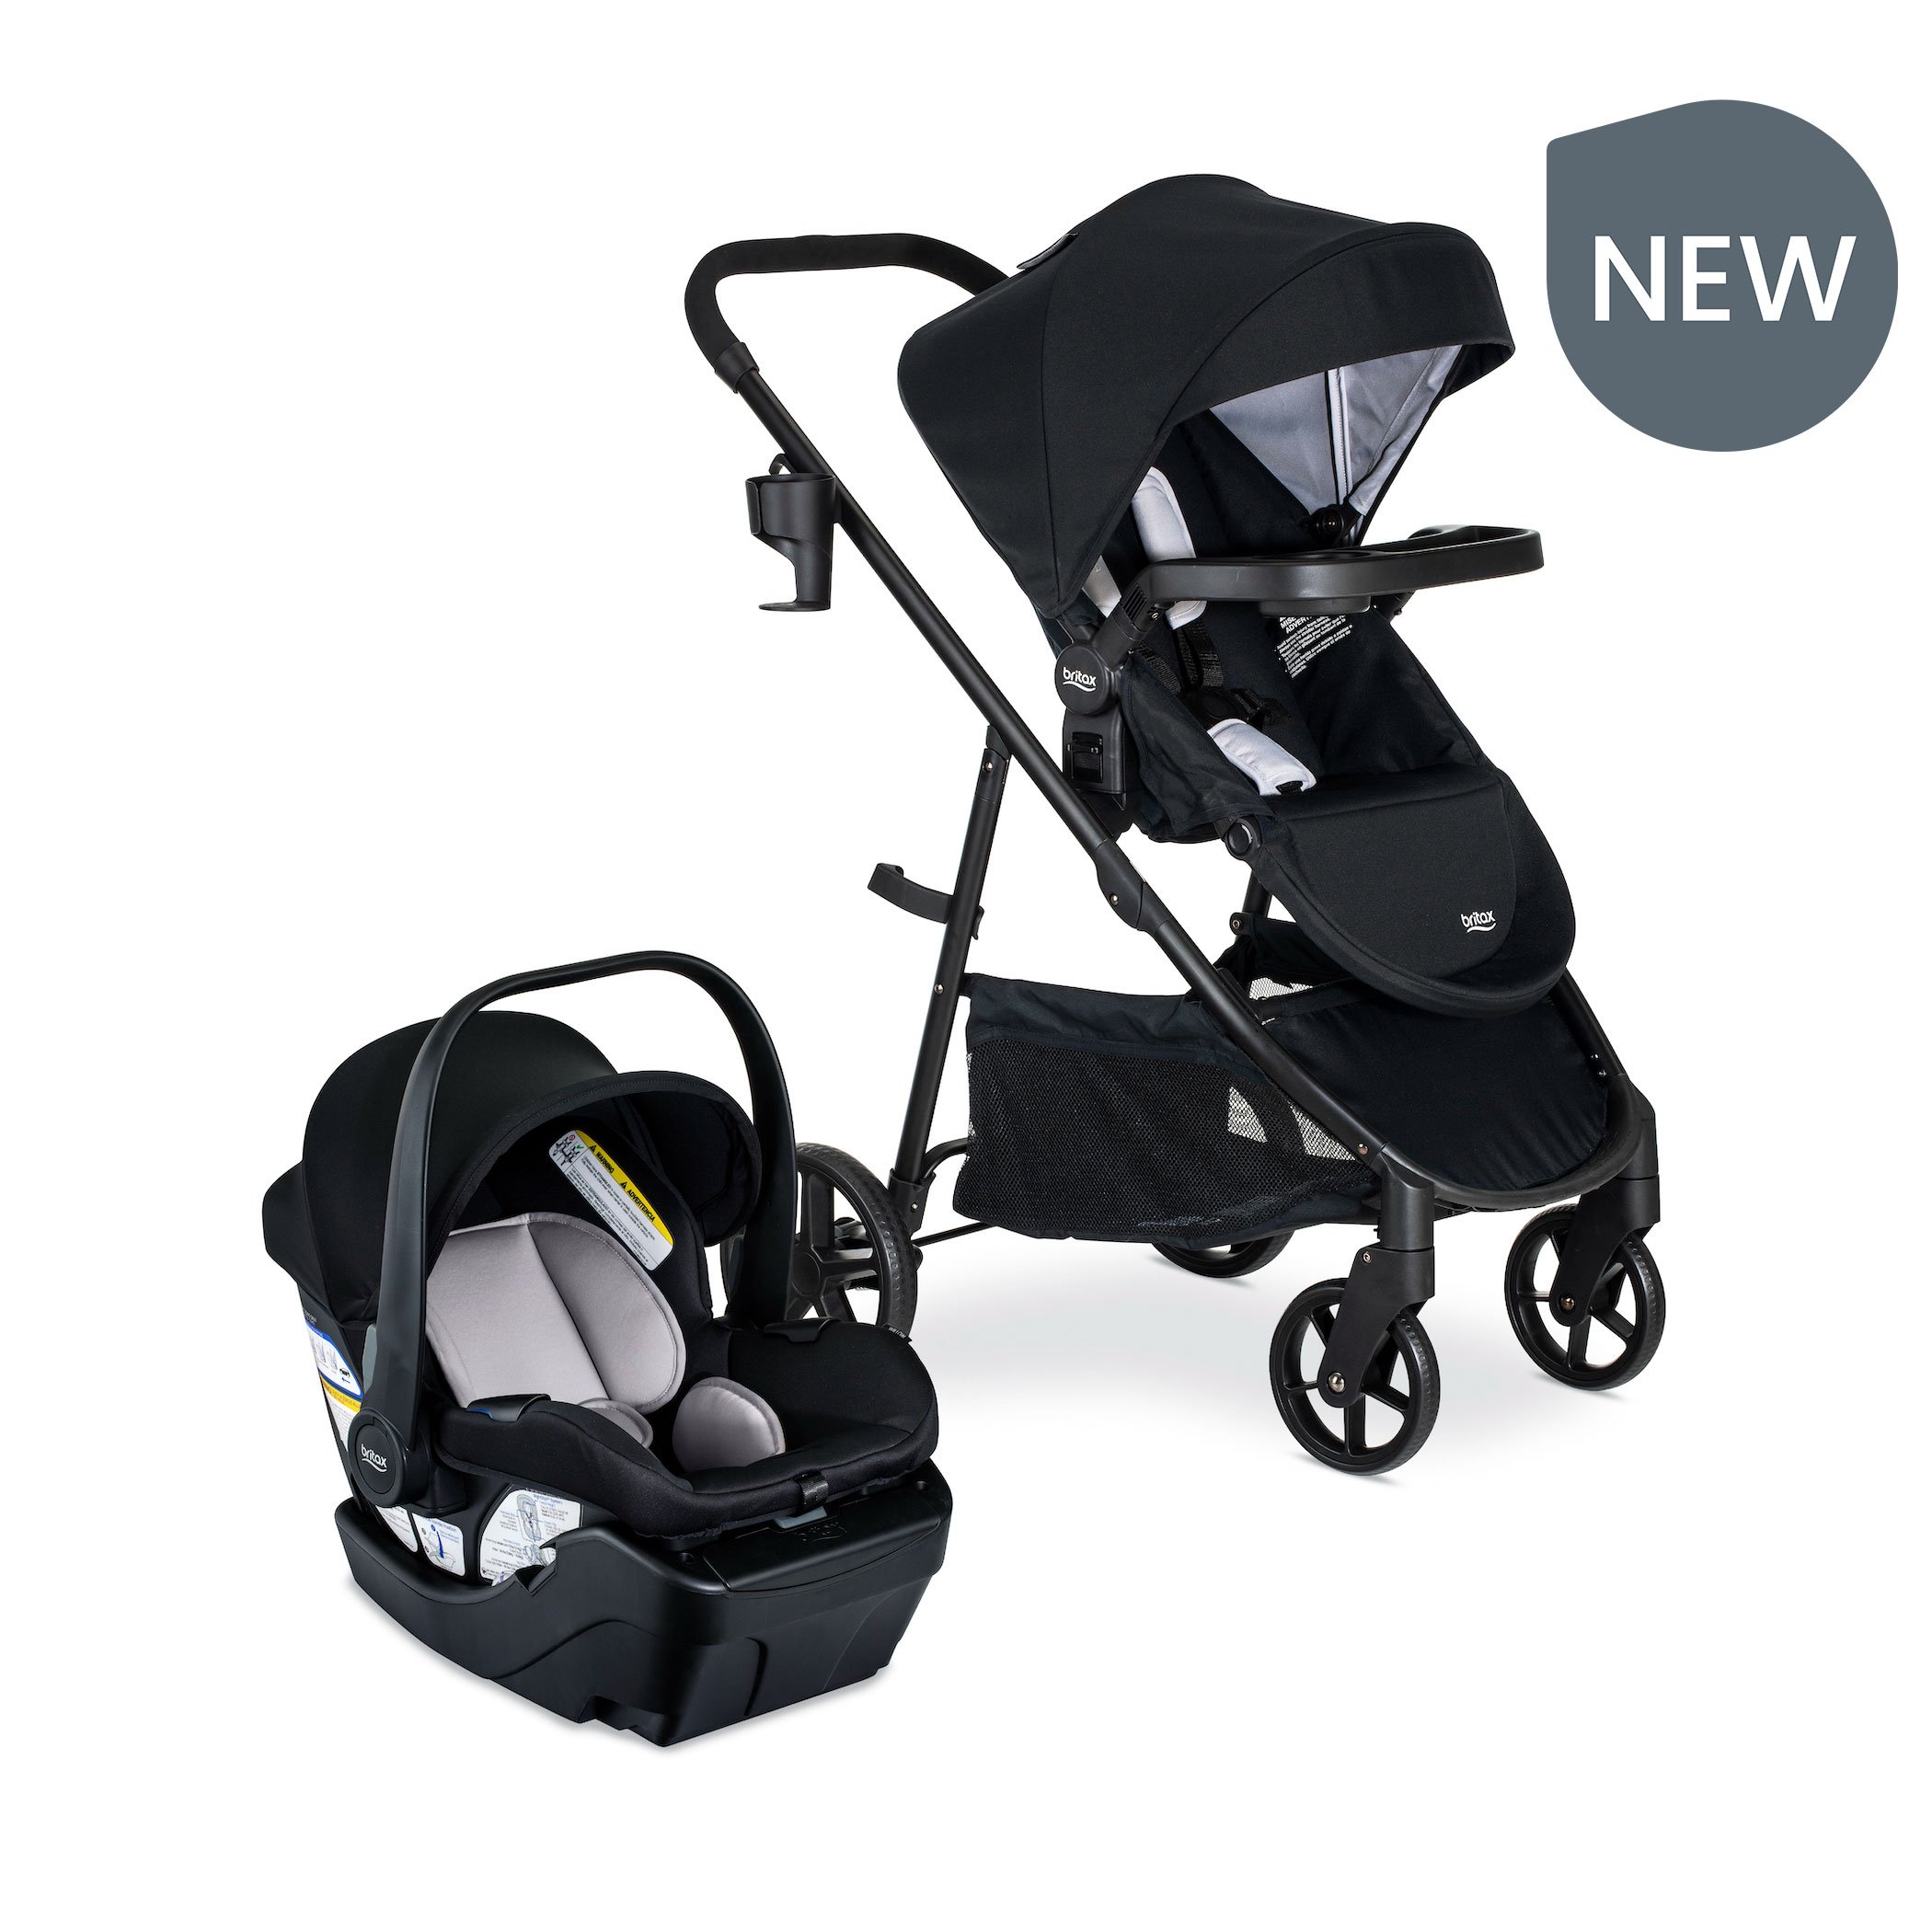 britax willow brook travel system reviews